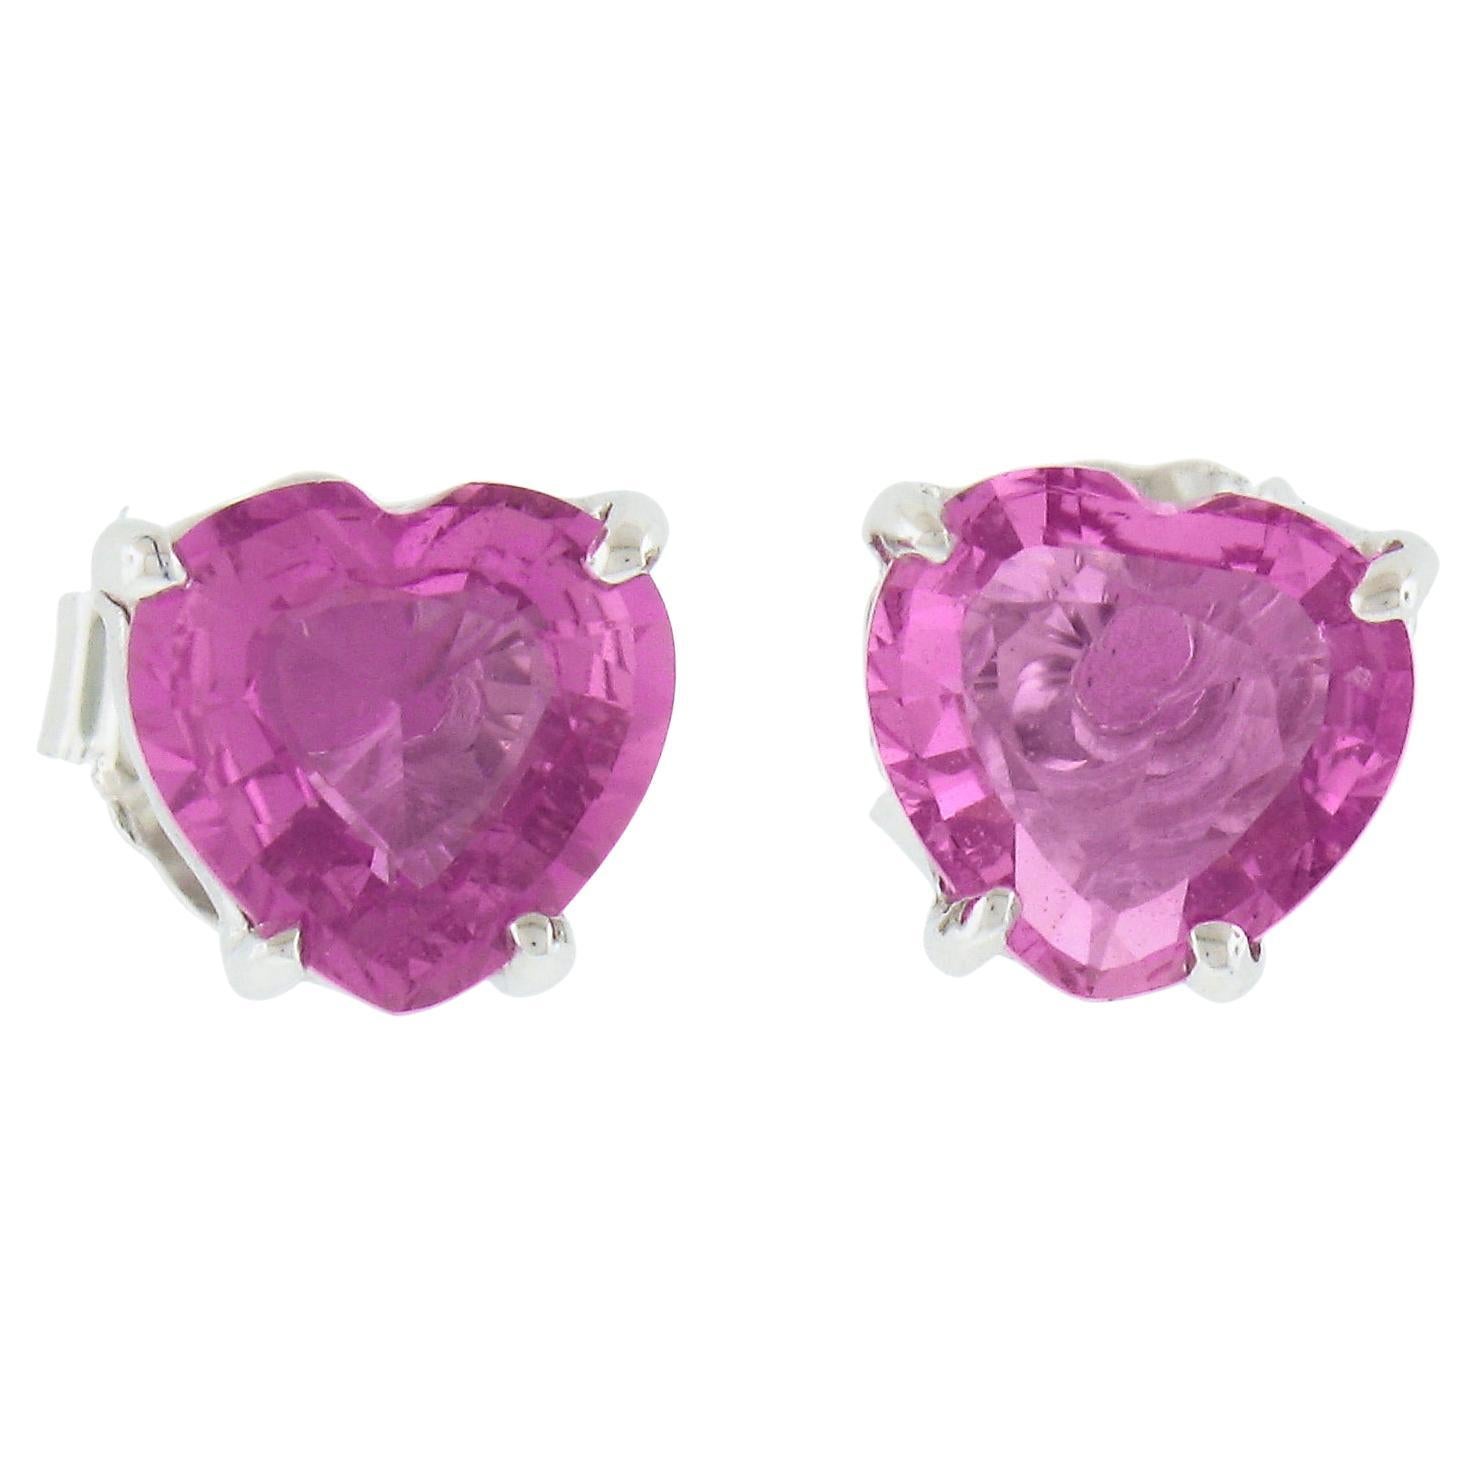 New 14K White Gold 1.44ctw Heart Prong Set Pink Sapphire Solitaire Stud Earrings